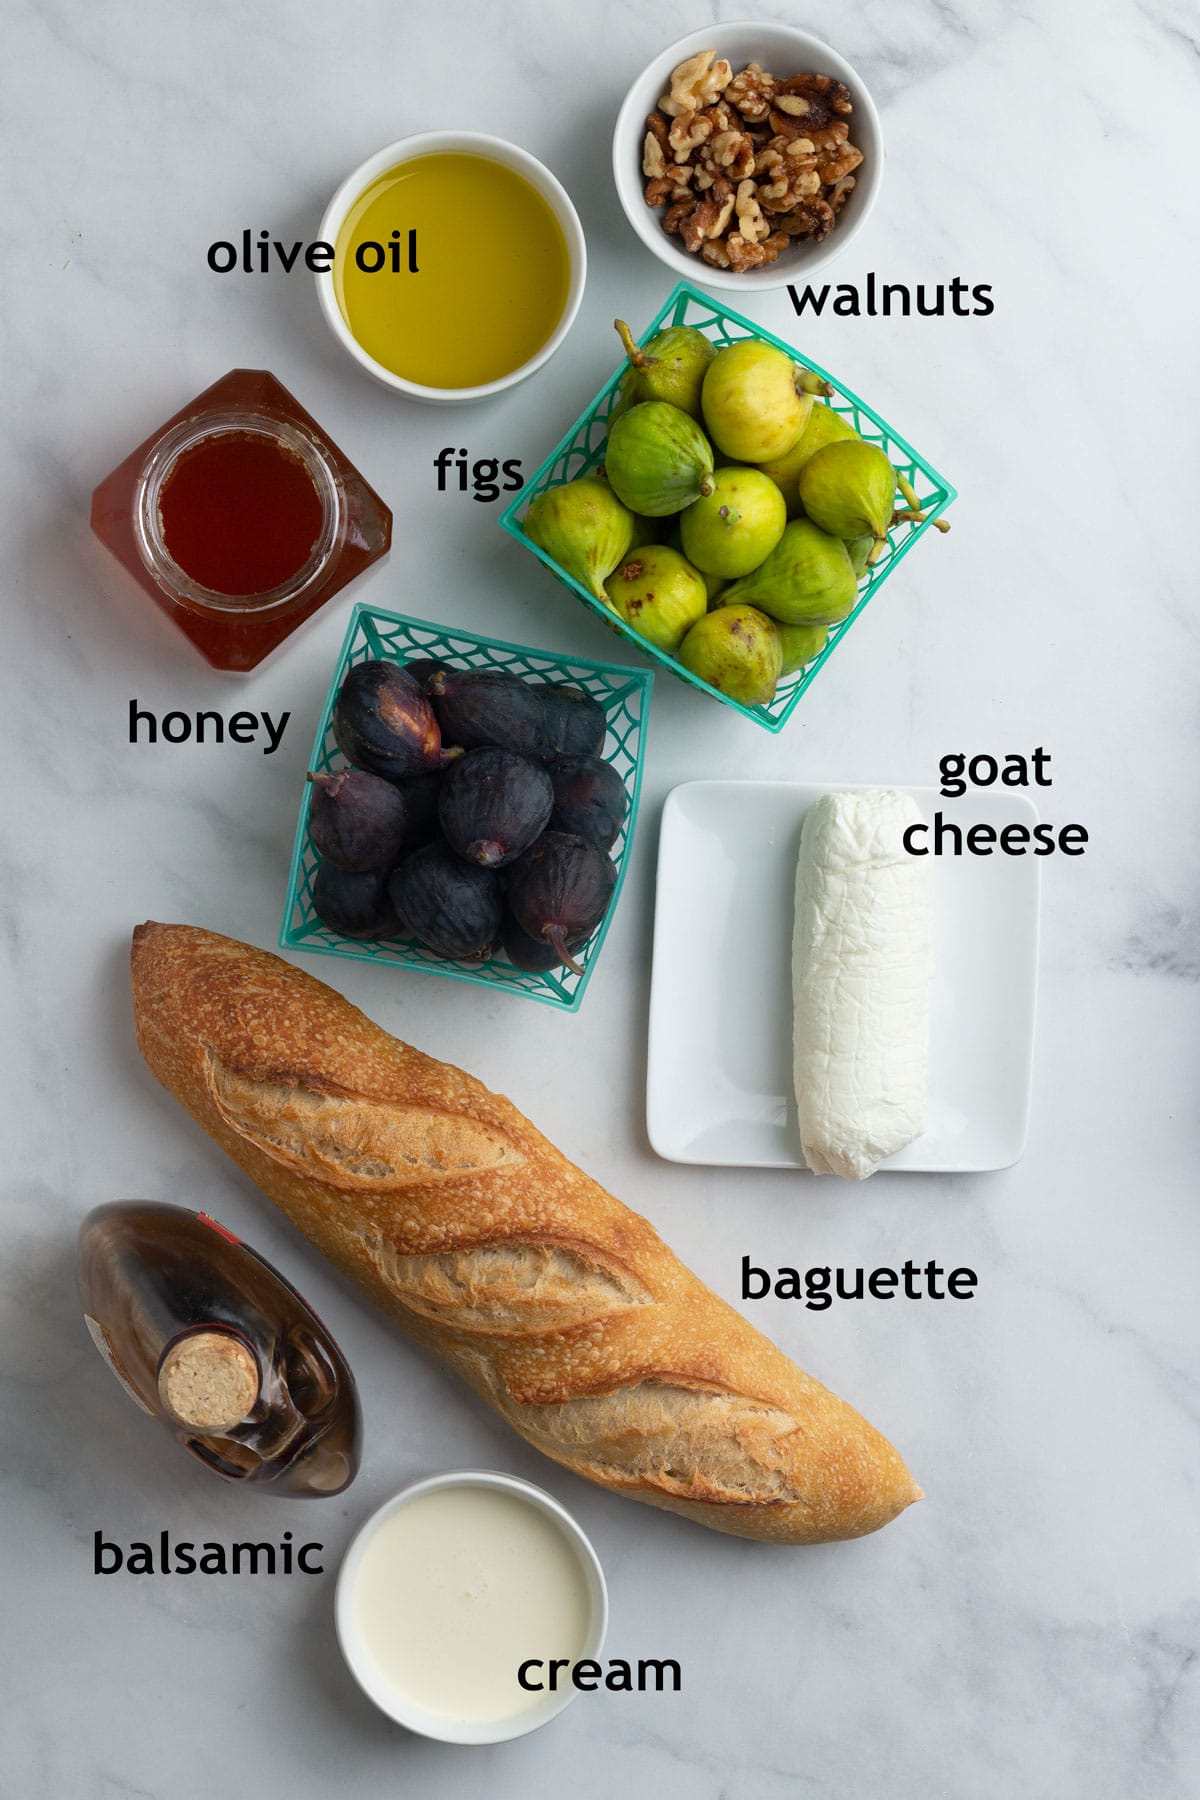 Ingredients, including baguette bread, goat cheese, cream, figs, walnuts, honey and aged balsamic vinegar.